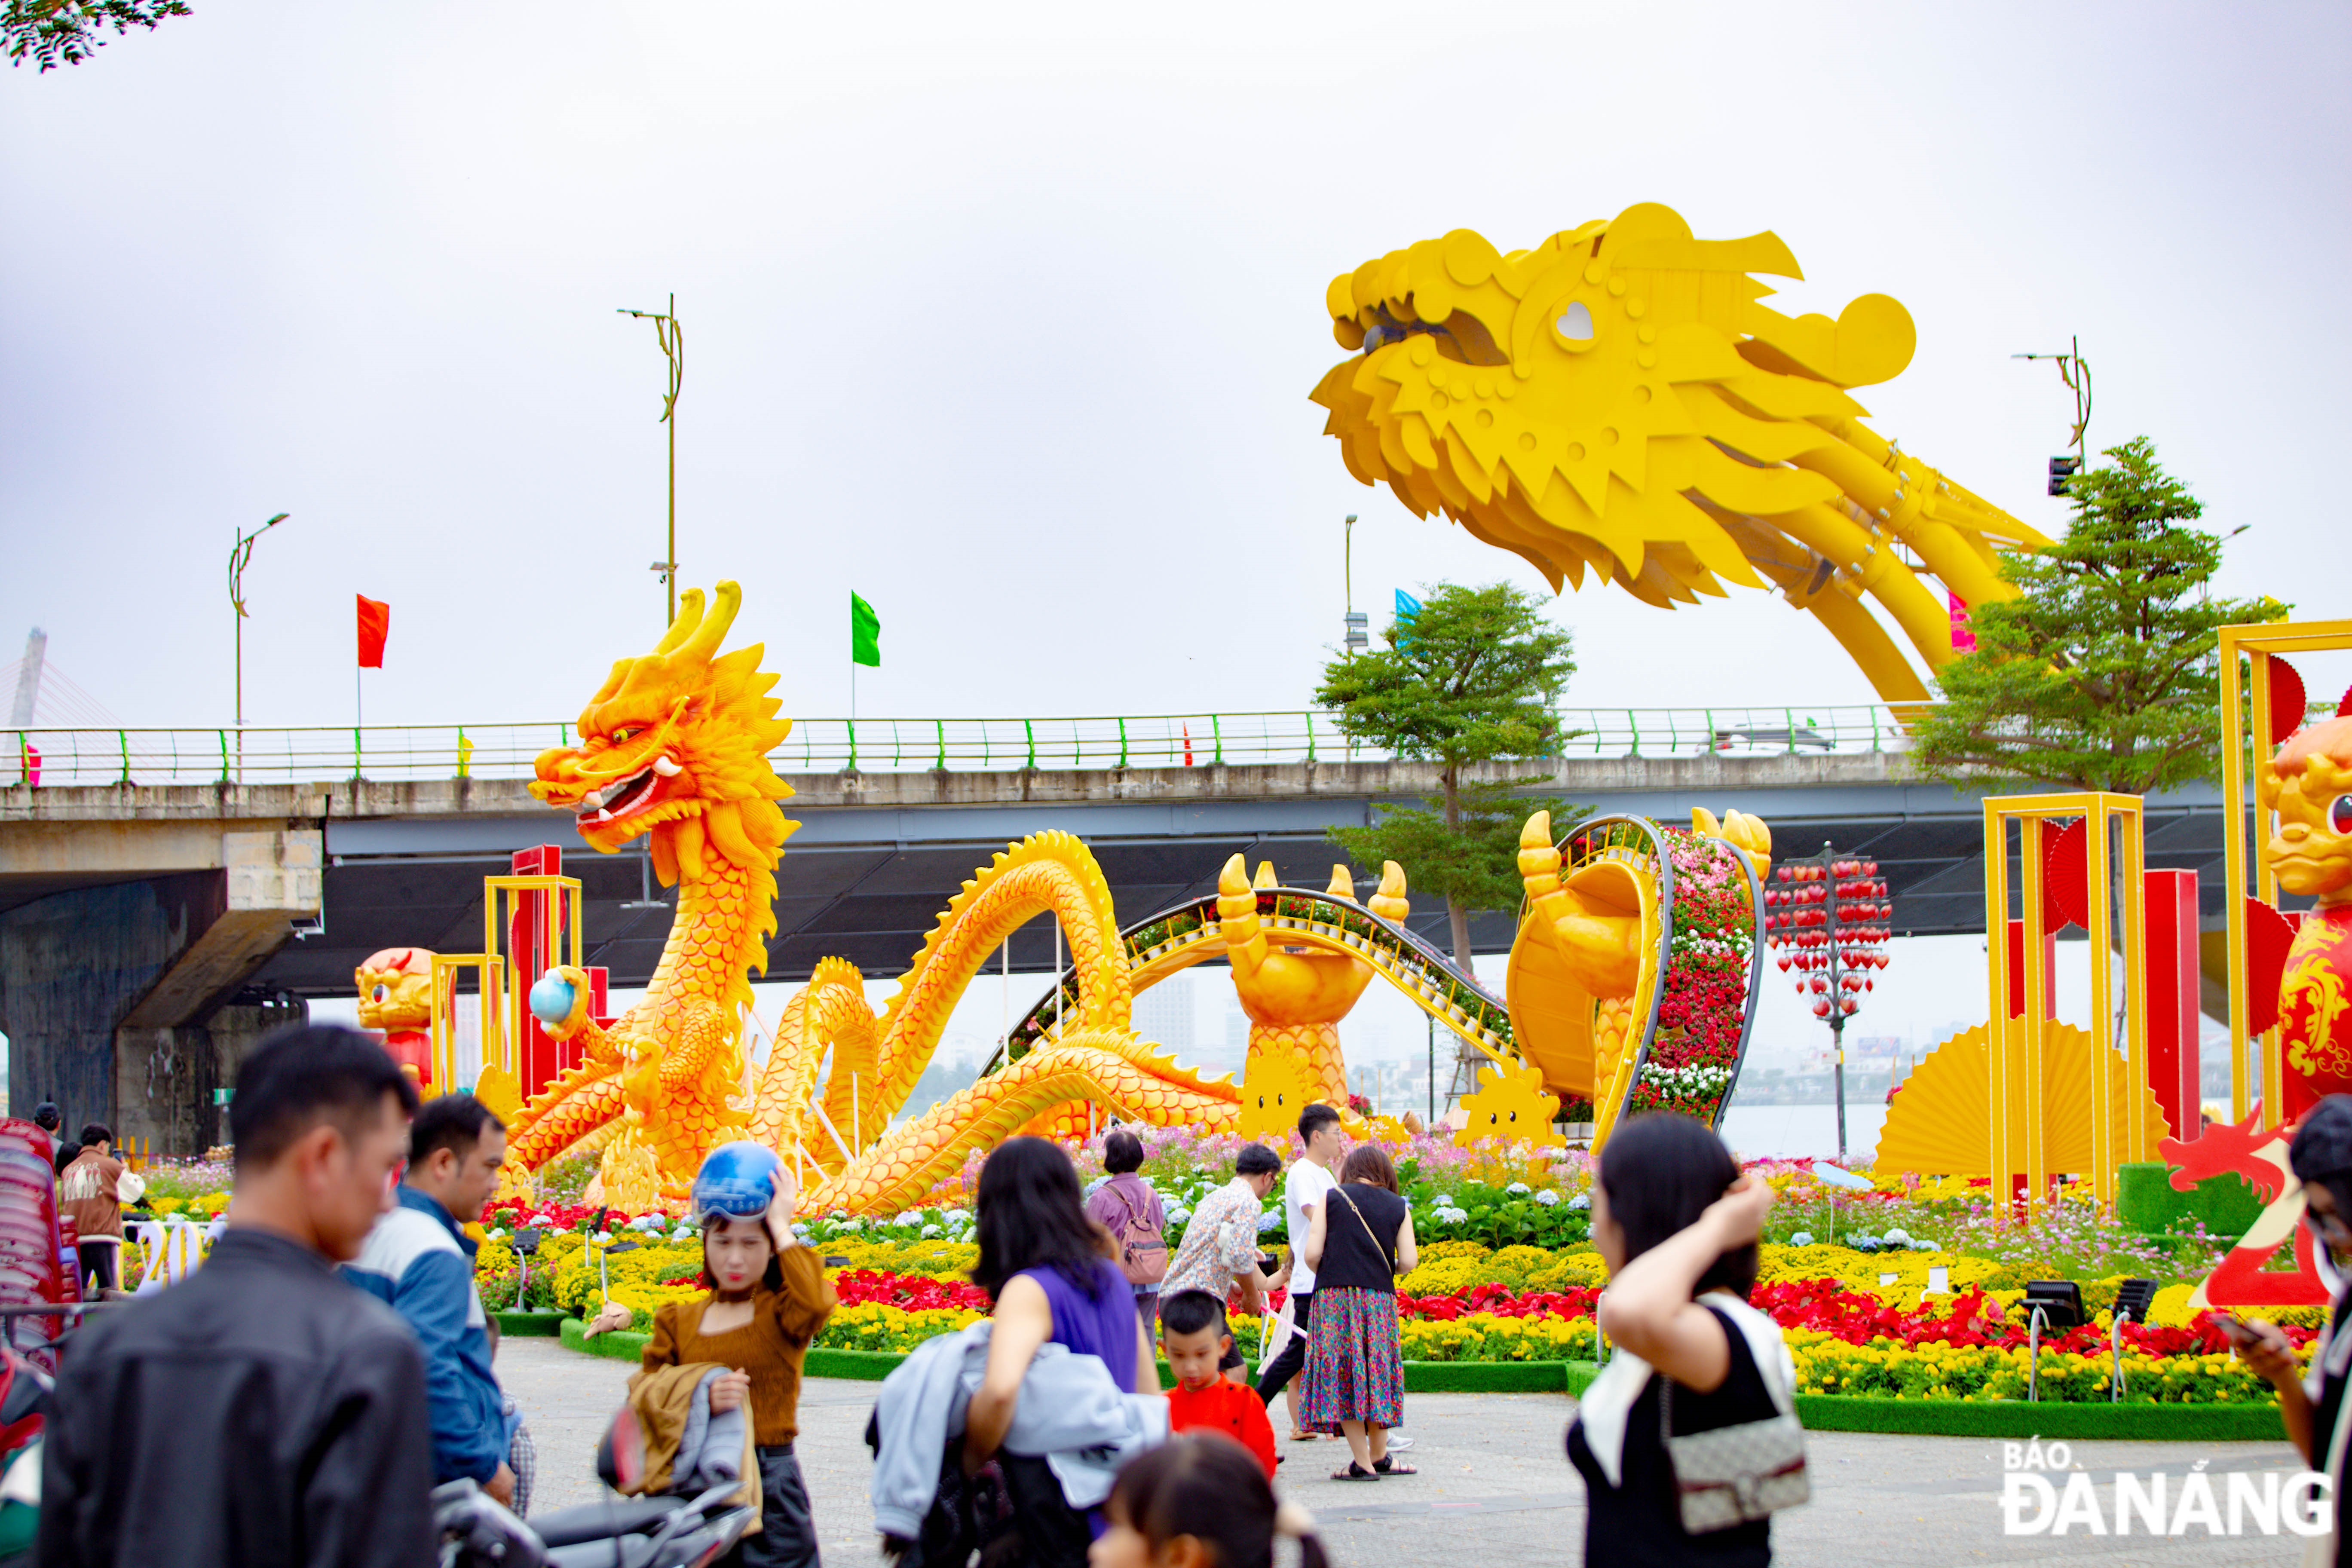 The majestic Dragon mascot on Tran Hung Dao Street attracts a large number of tourists to admire and take photos.